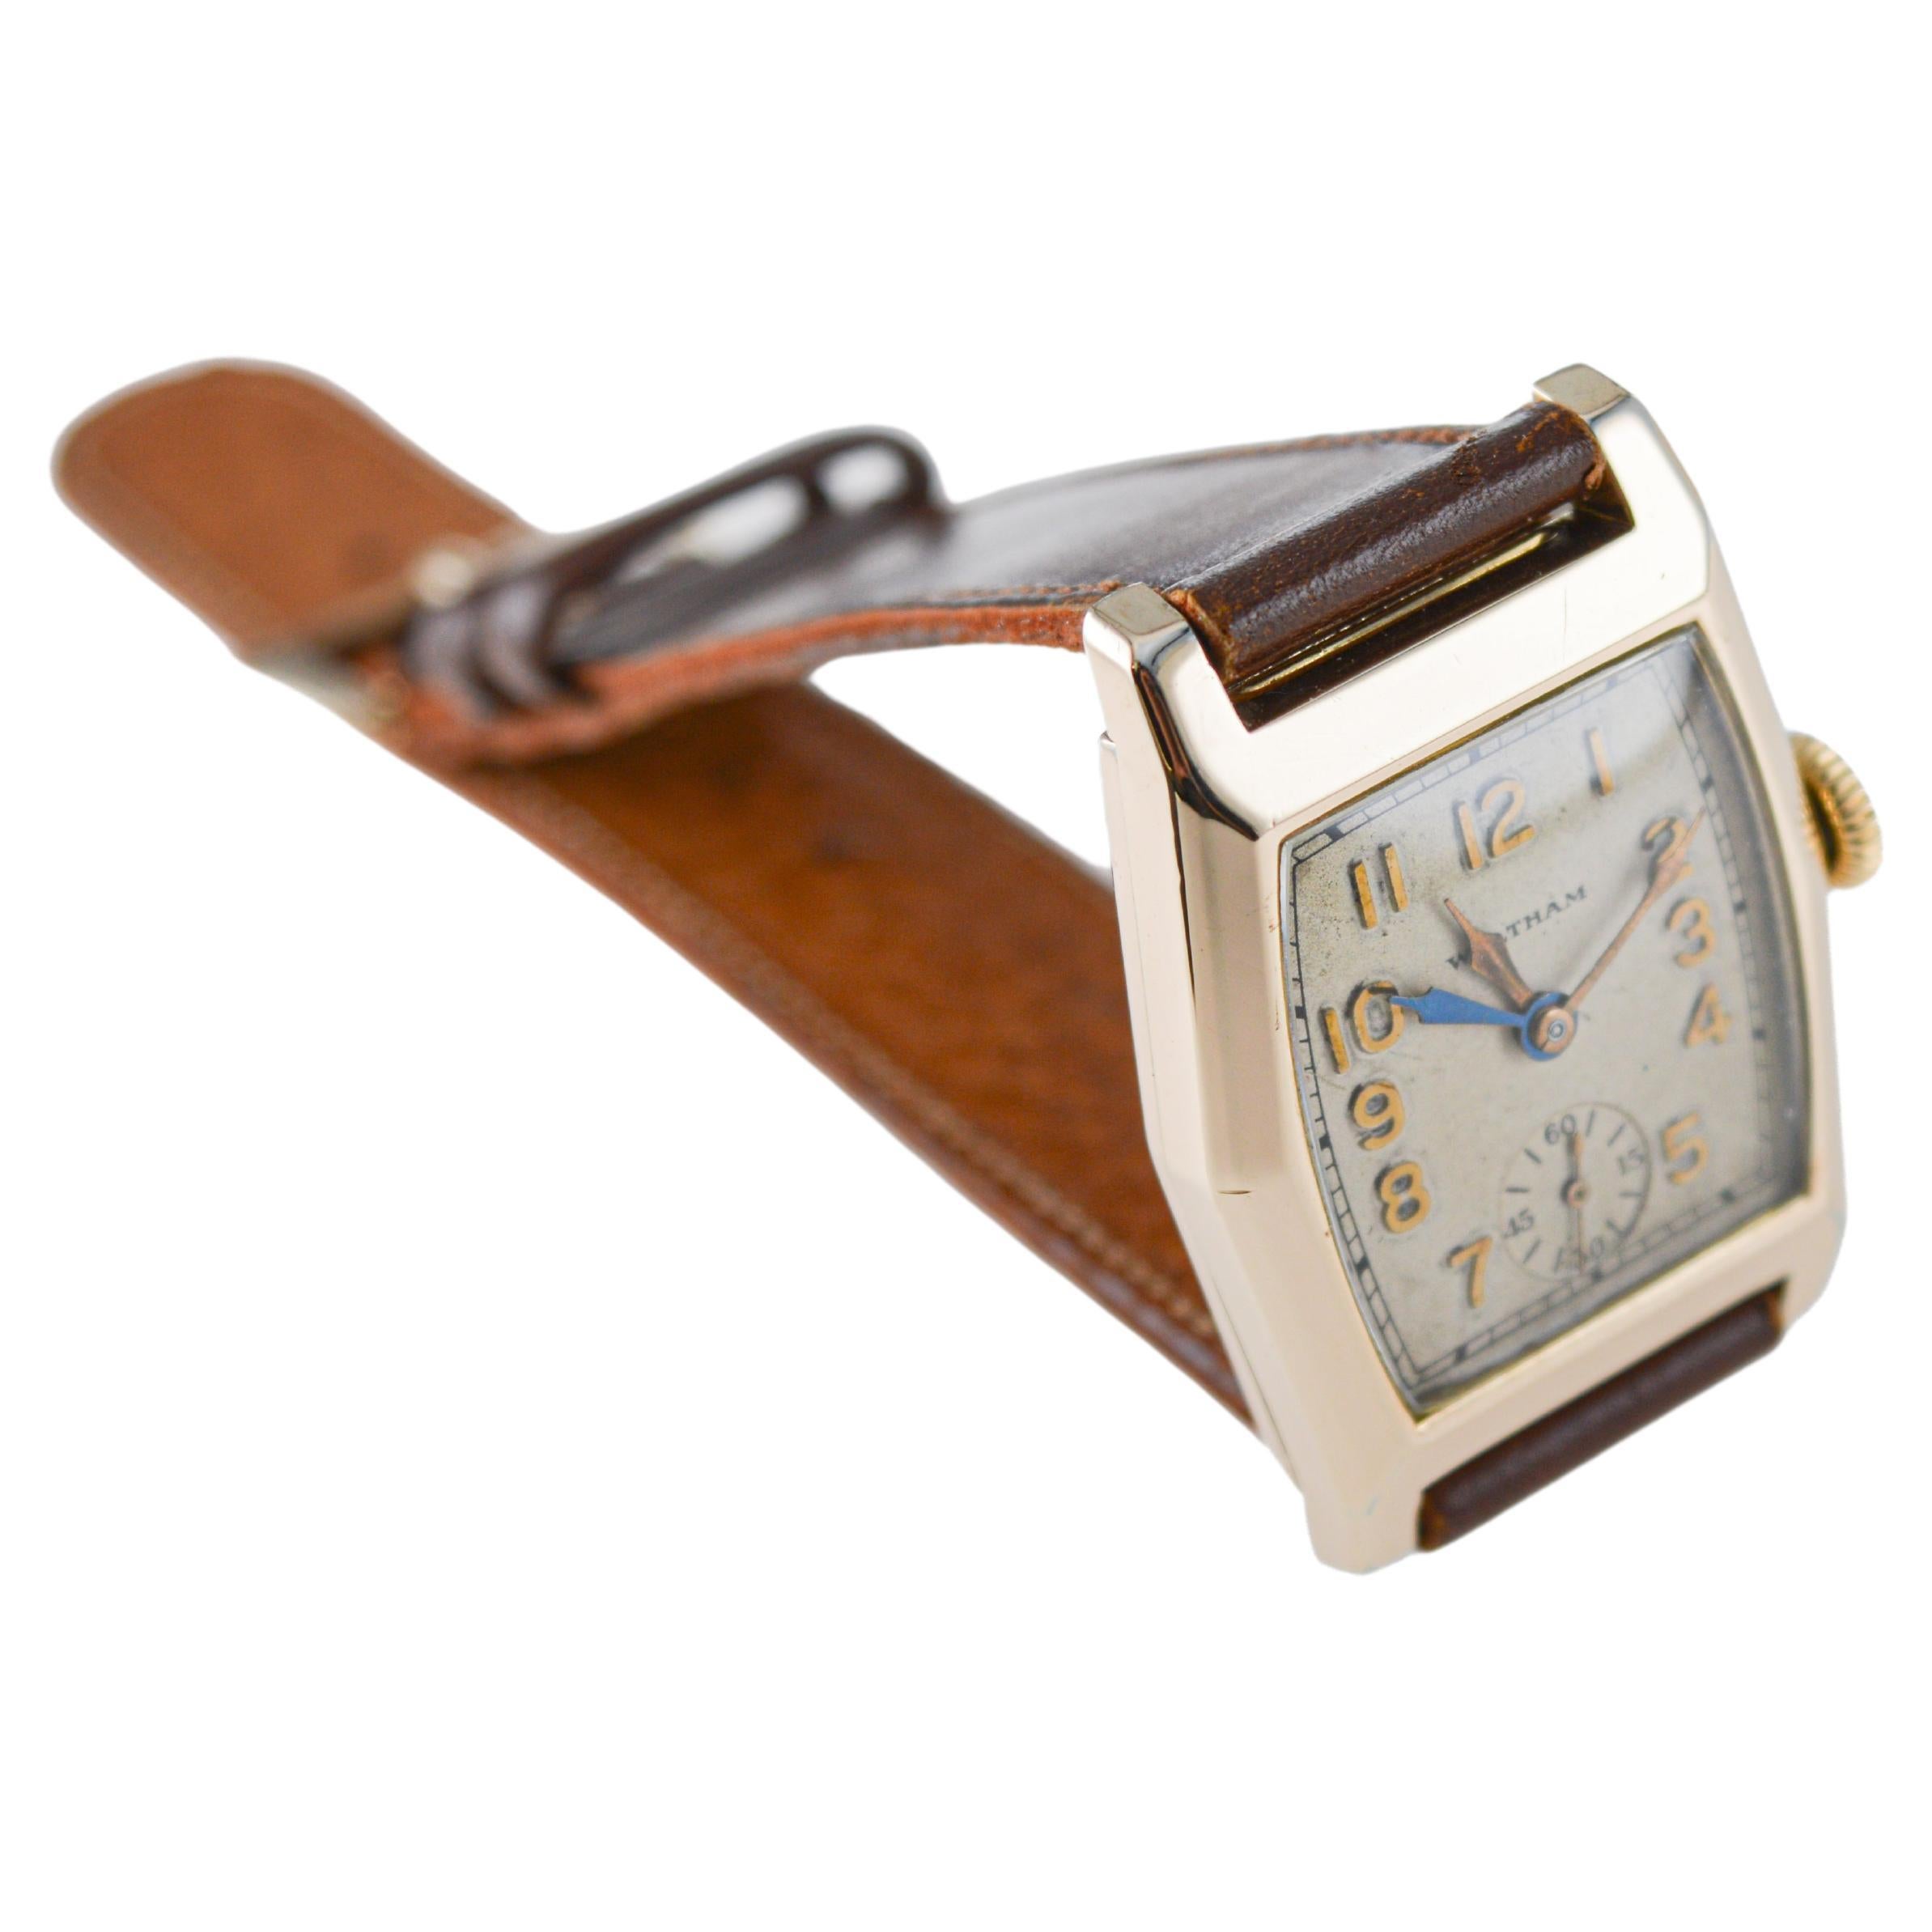 Waltham Yellow Gold Filled Art Deco Dual Time Watch with Original Dial and Strap 1